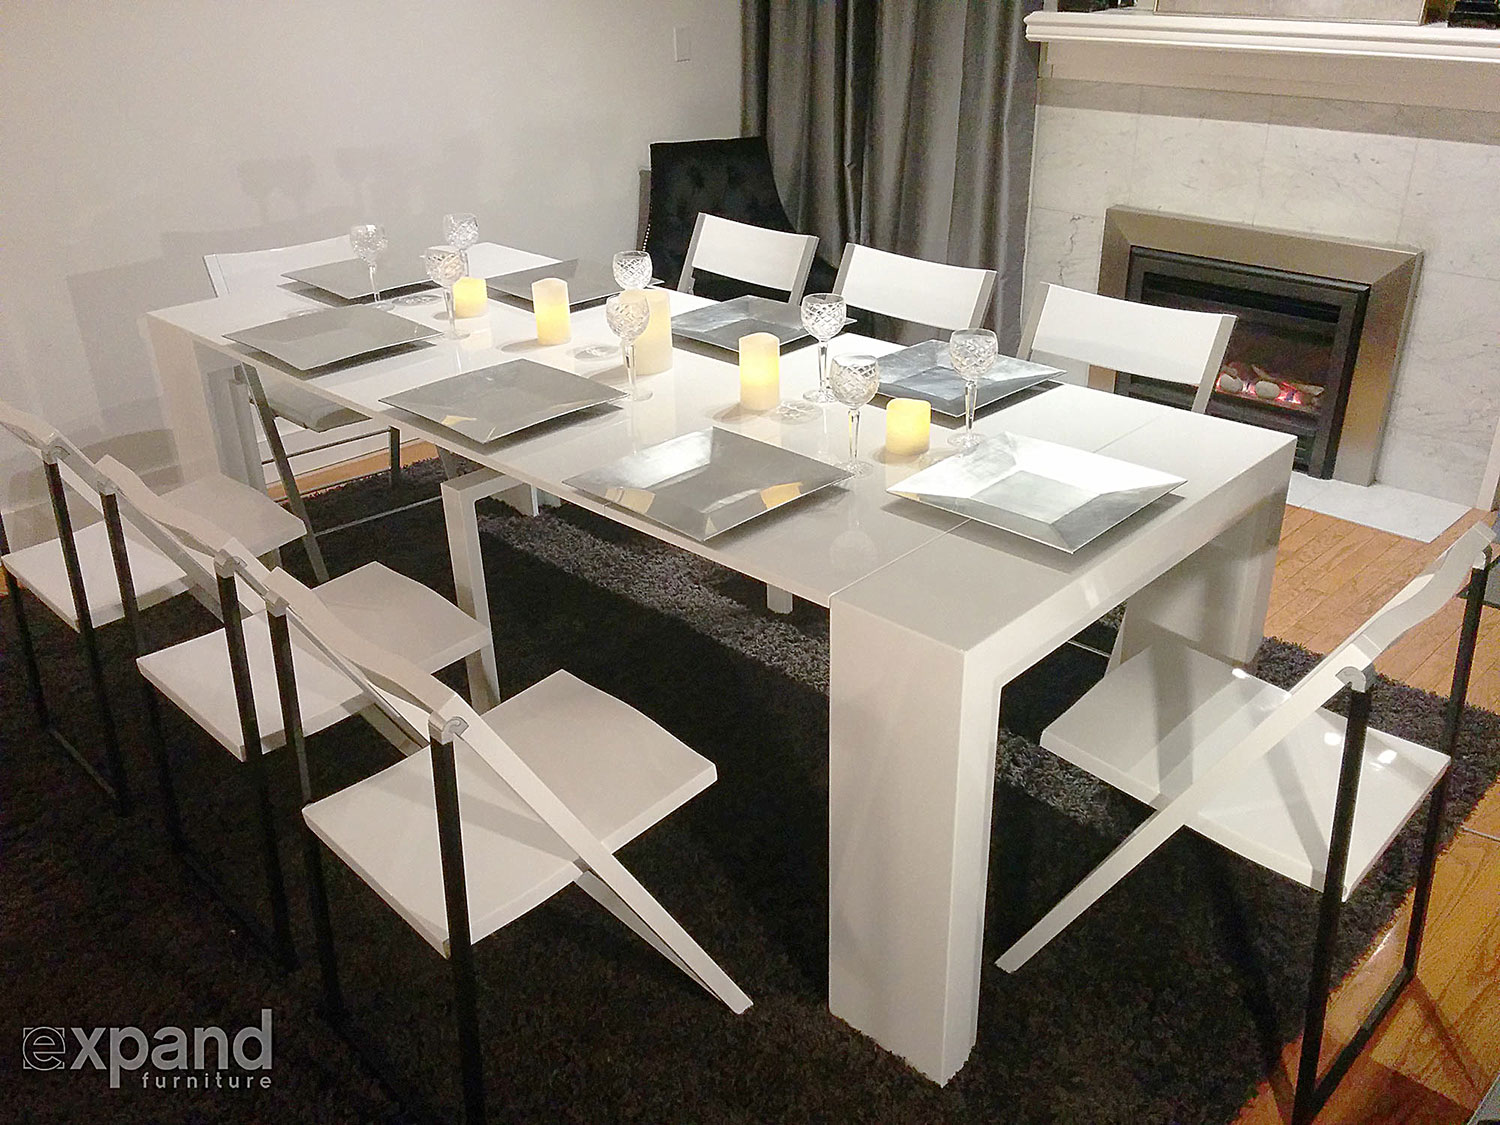 Junior Giant Extending Table Set With Chairs Expand Furniture